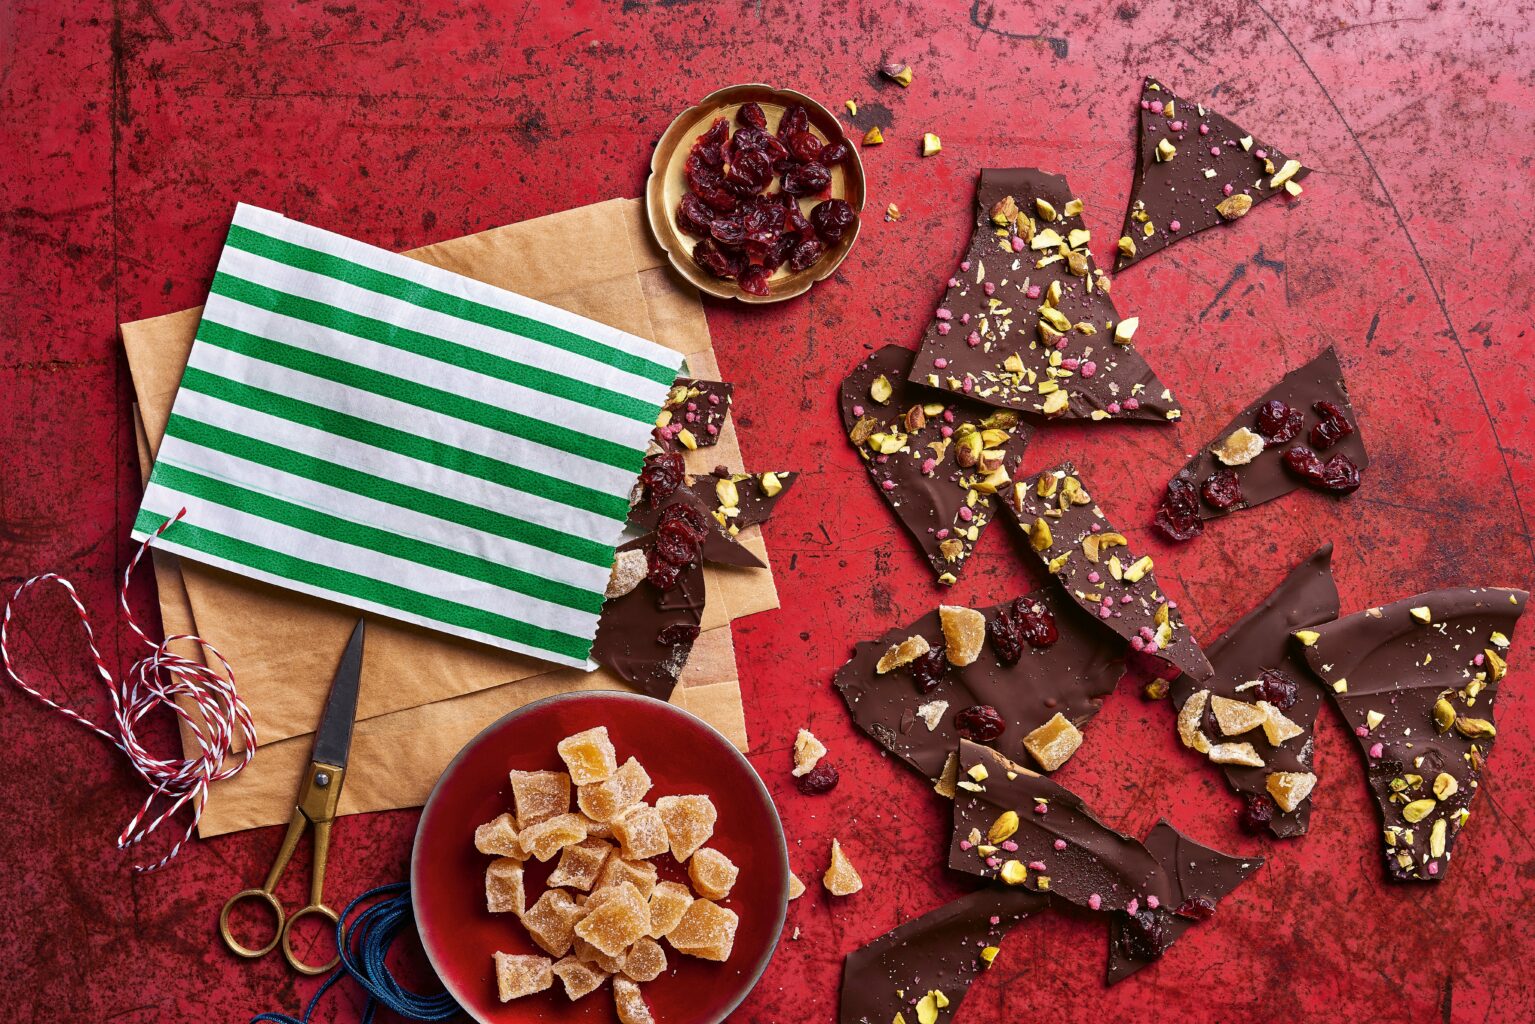 Chocolate Bark excerpted from A Very Vegan Christmas by Sam Dixon.